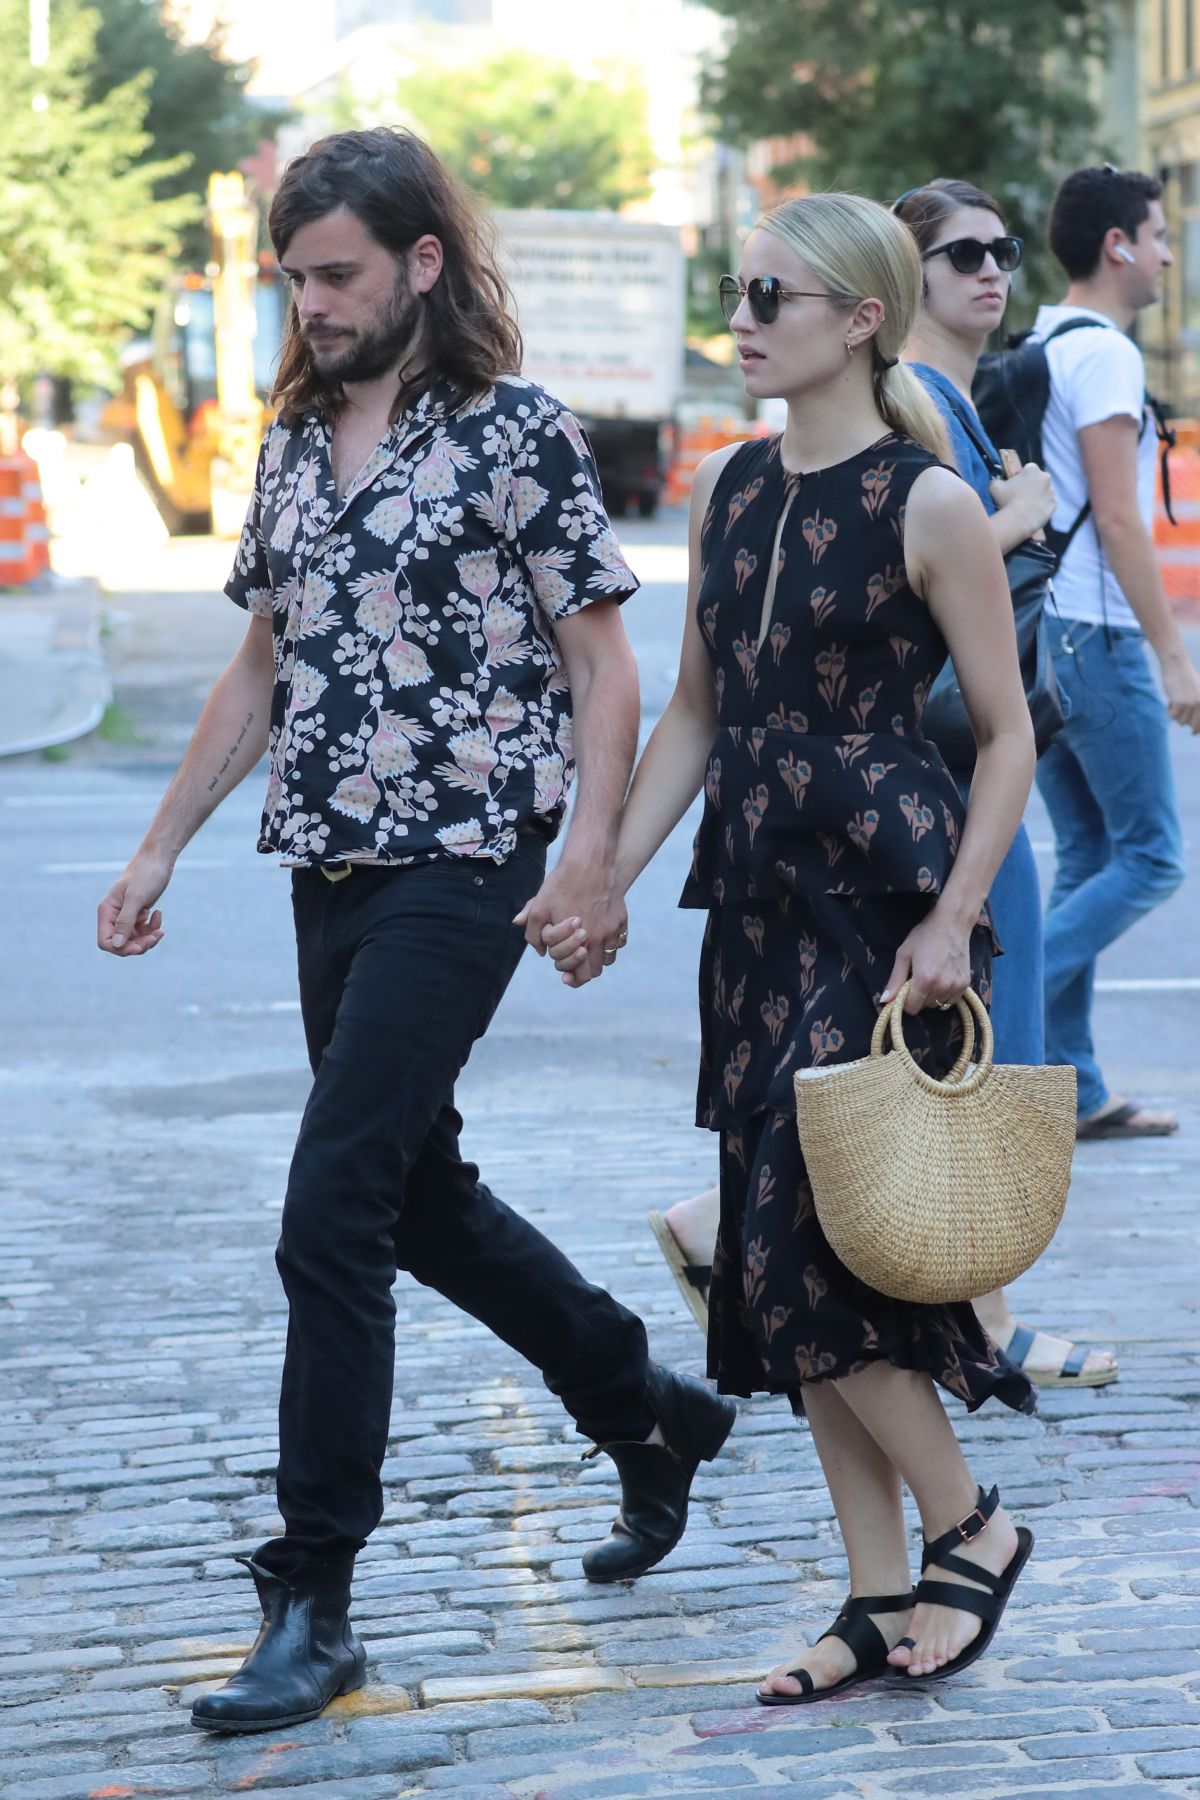 dianna-agron-and-winston-marshall-out-in-new-york-07-09-2018-10.jpg